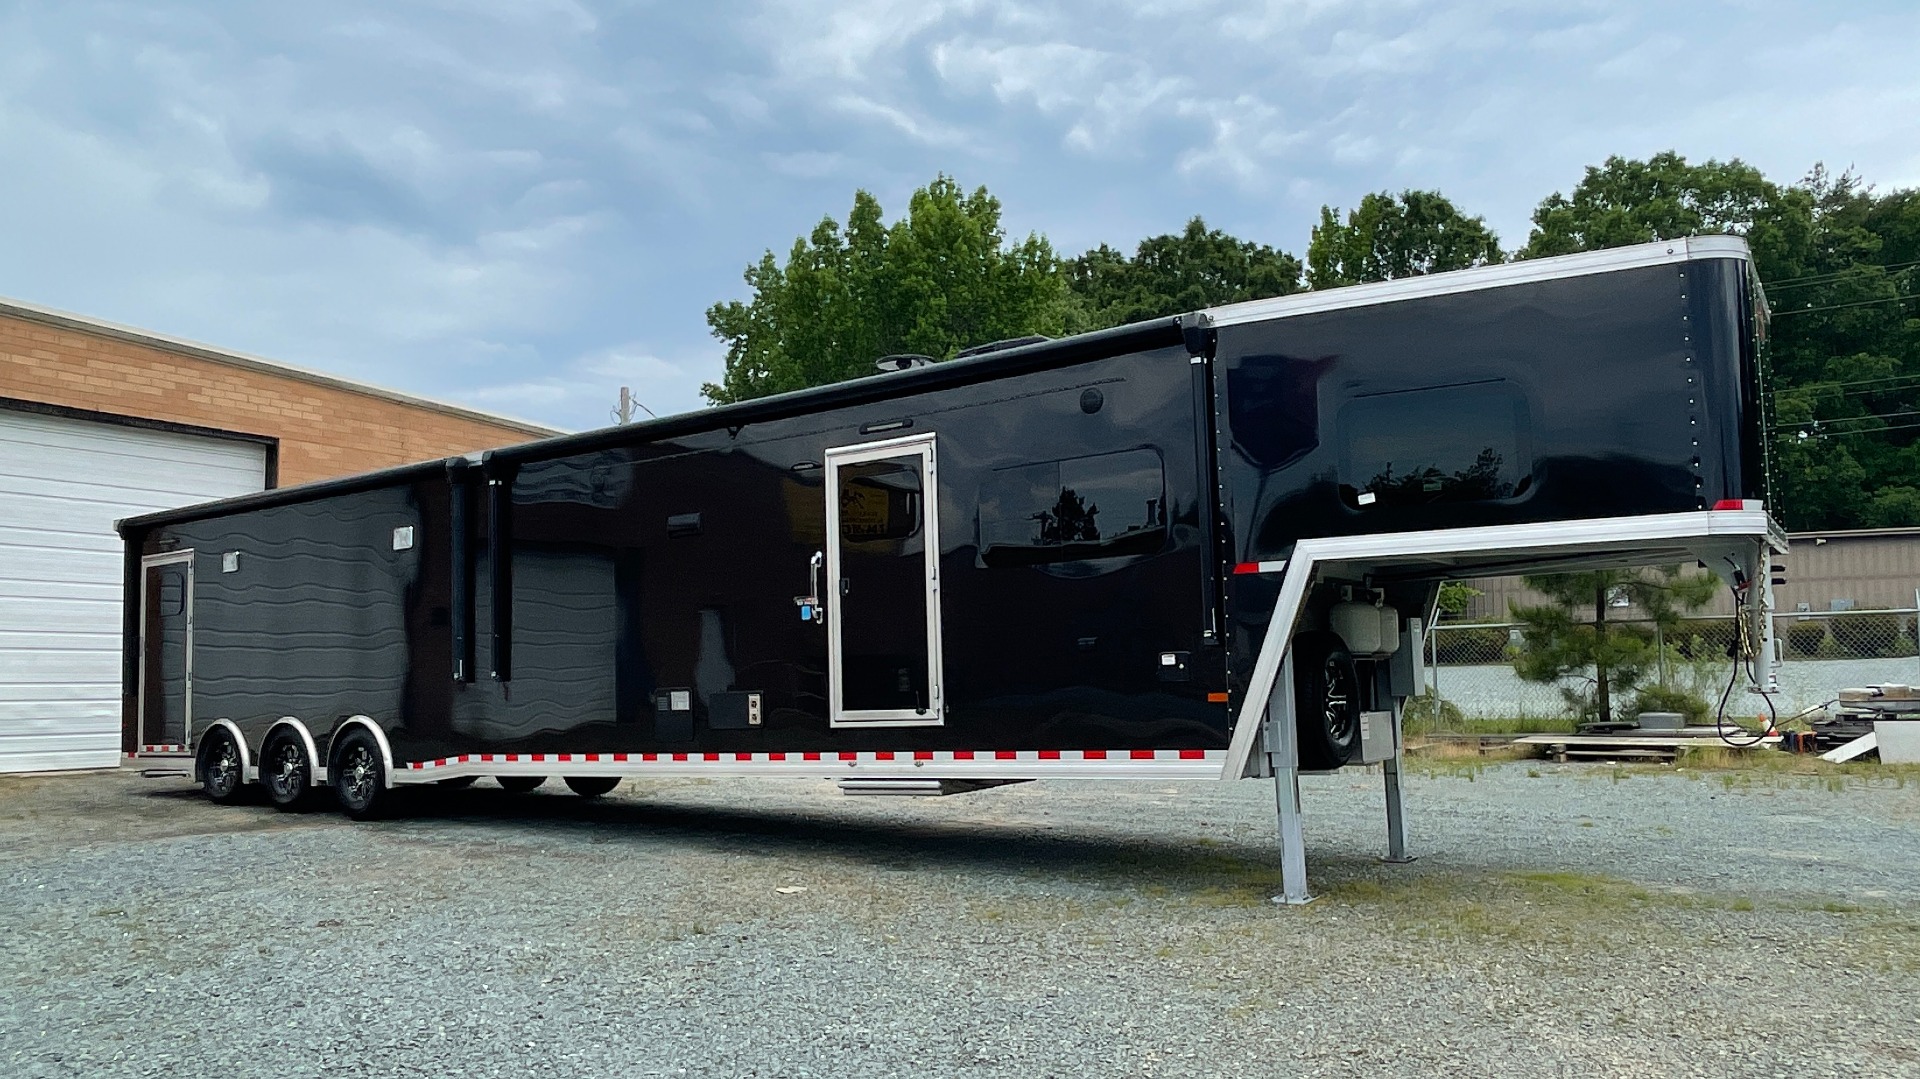 Used 2020 Sundowner 2986 SGM TOY HAULER 49FT / 29FT LIVING / 20FT FOR TOYS / TRIPLE-AXLE for sale $135,000 at Formula Imports in Charlotte NC 28227 1